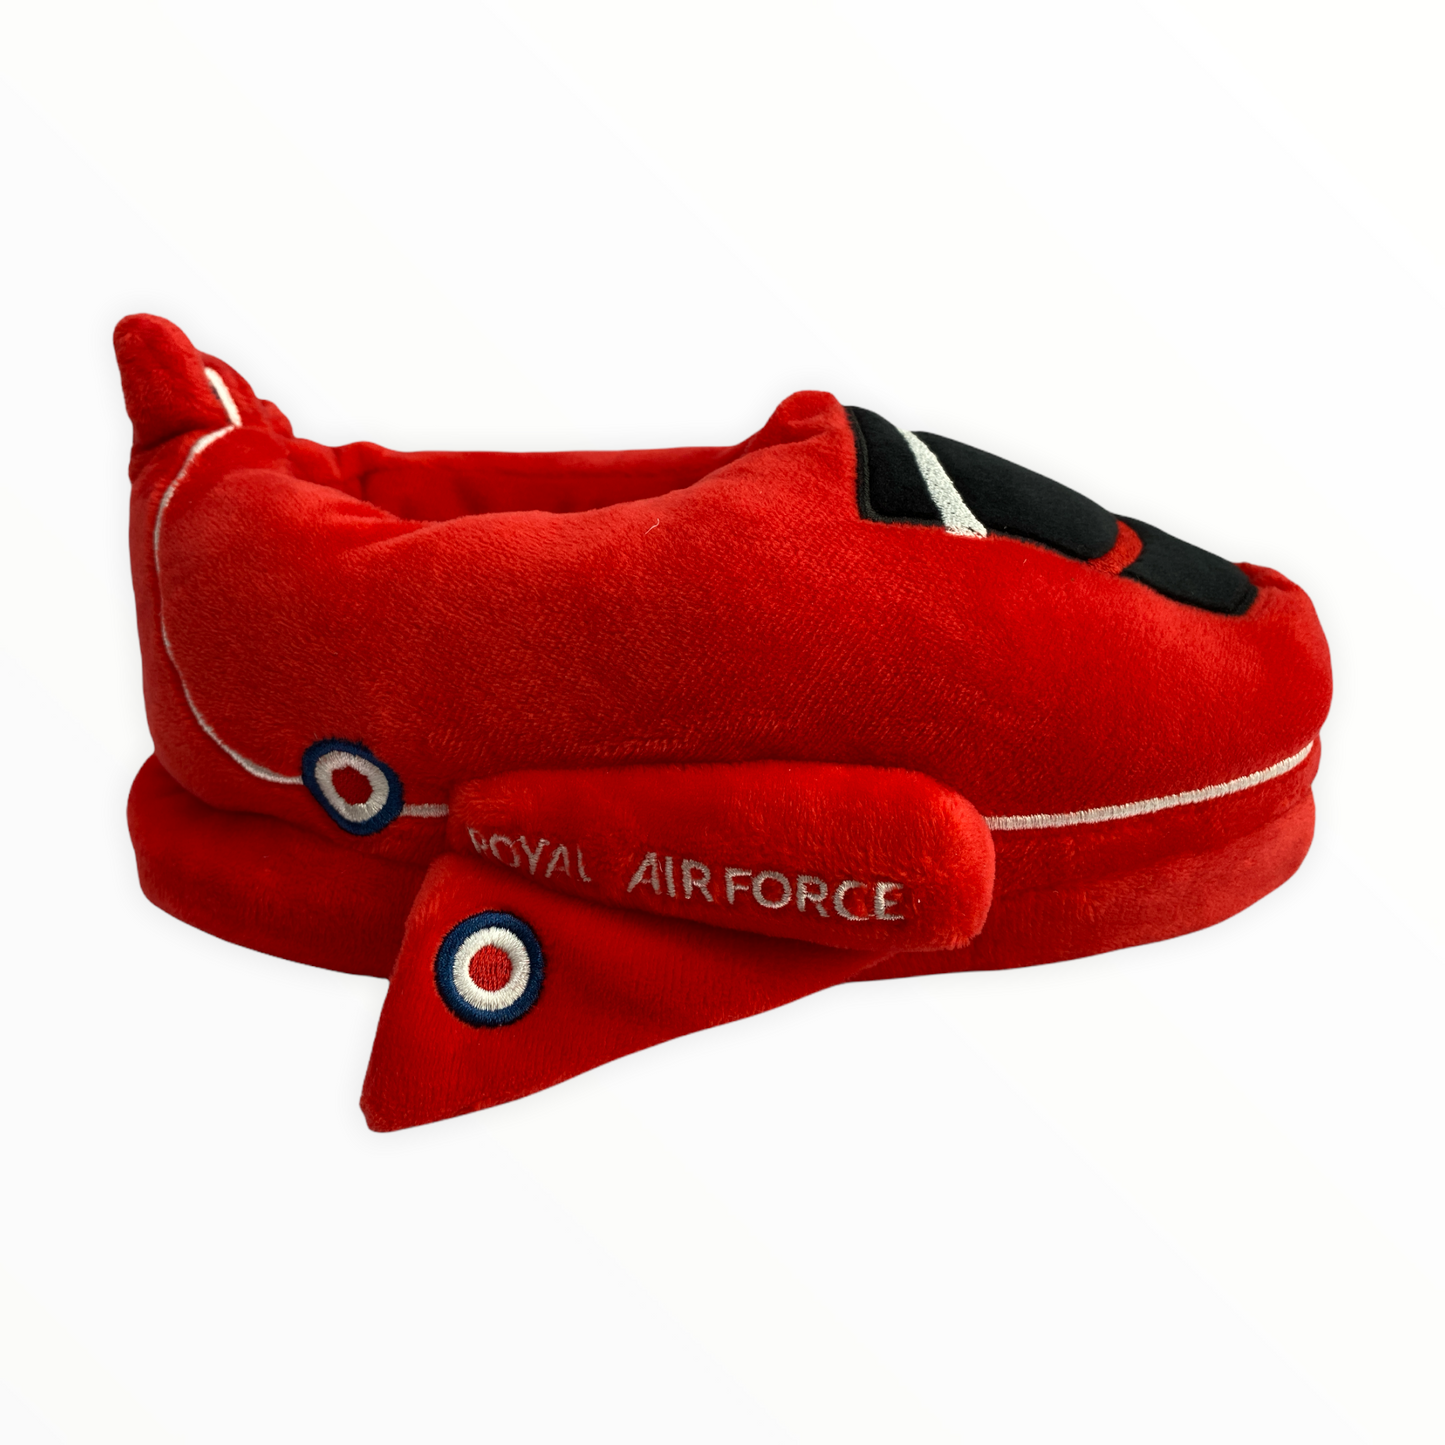 Official RAF Licensed Red Arrows Slippers